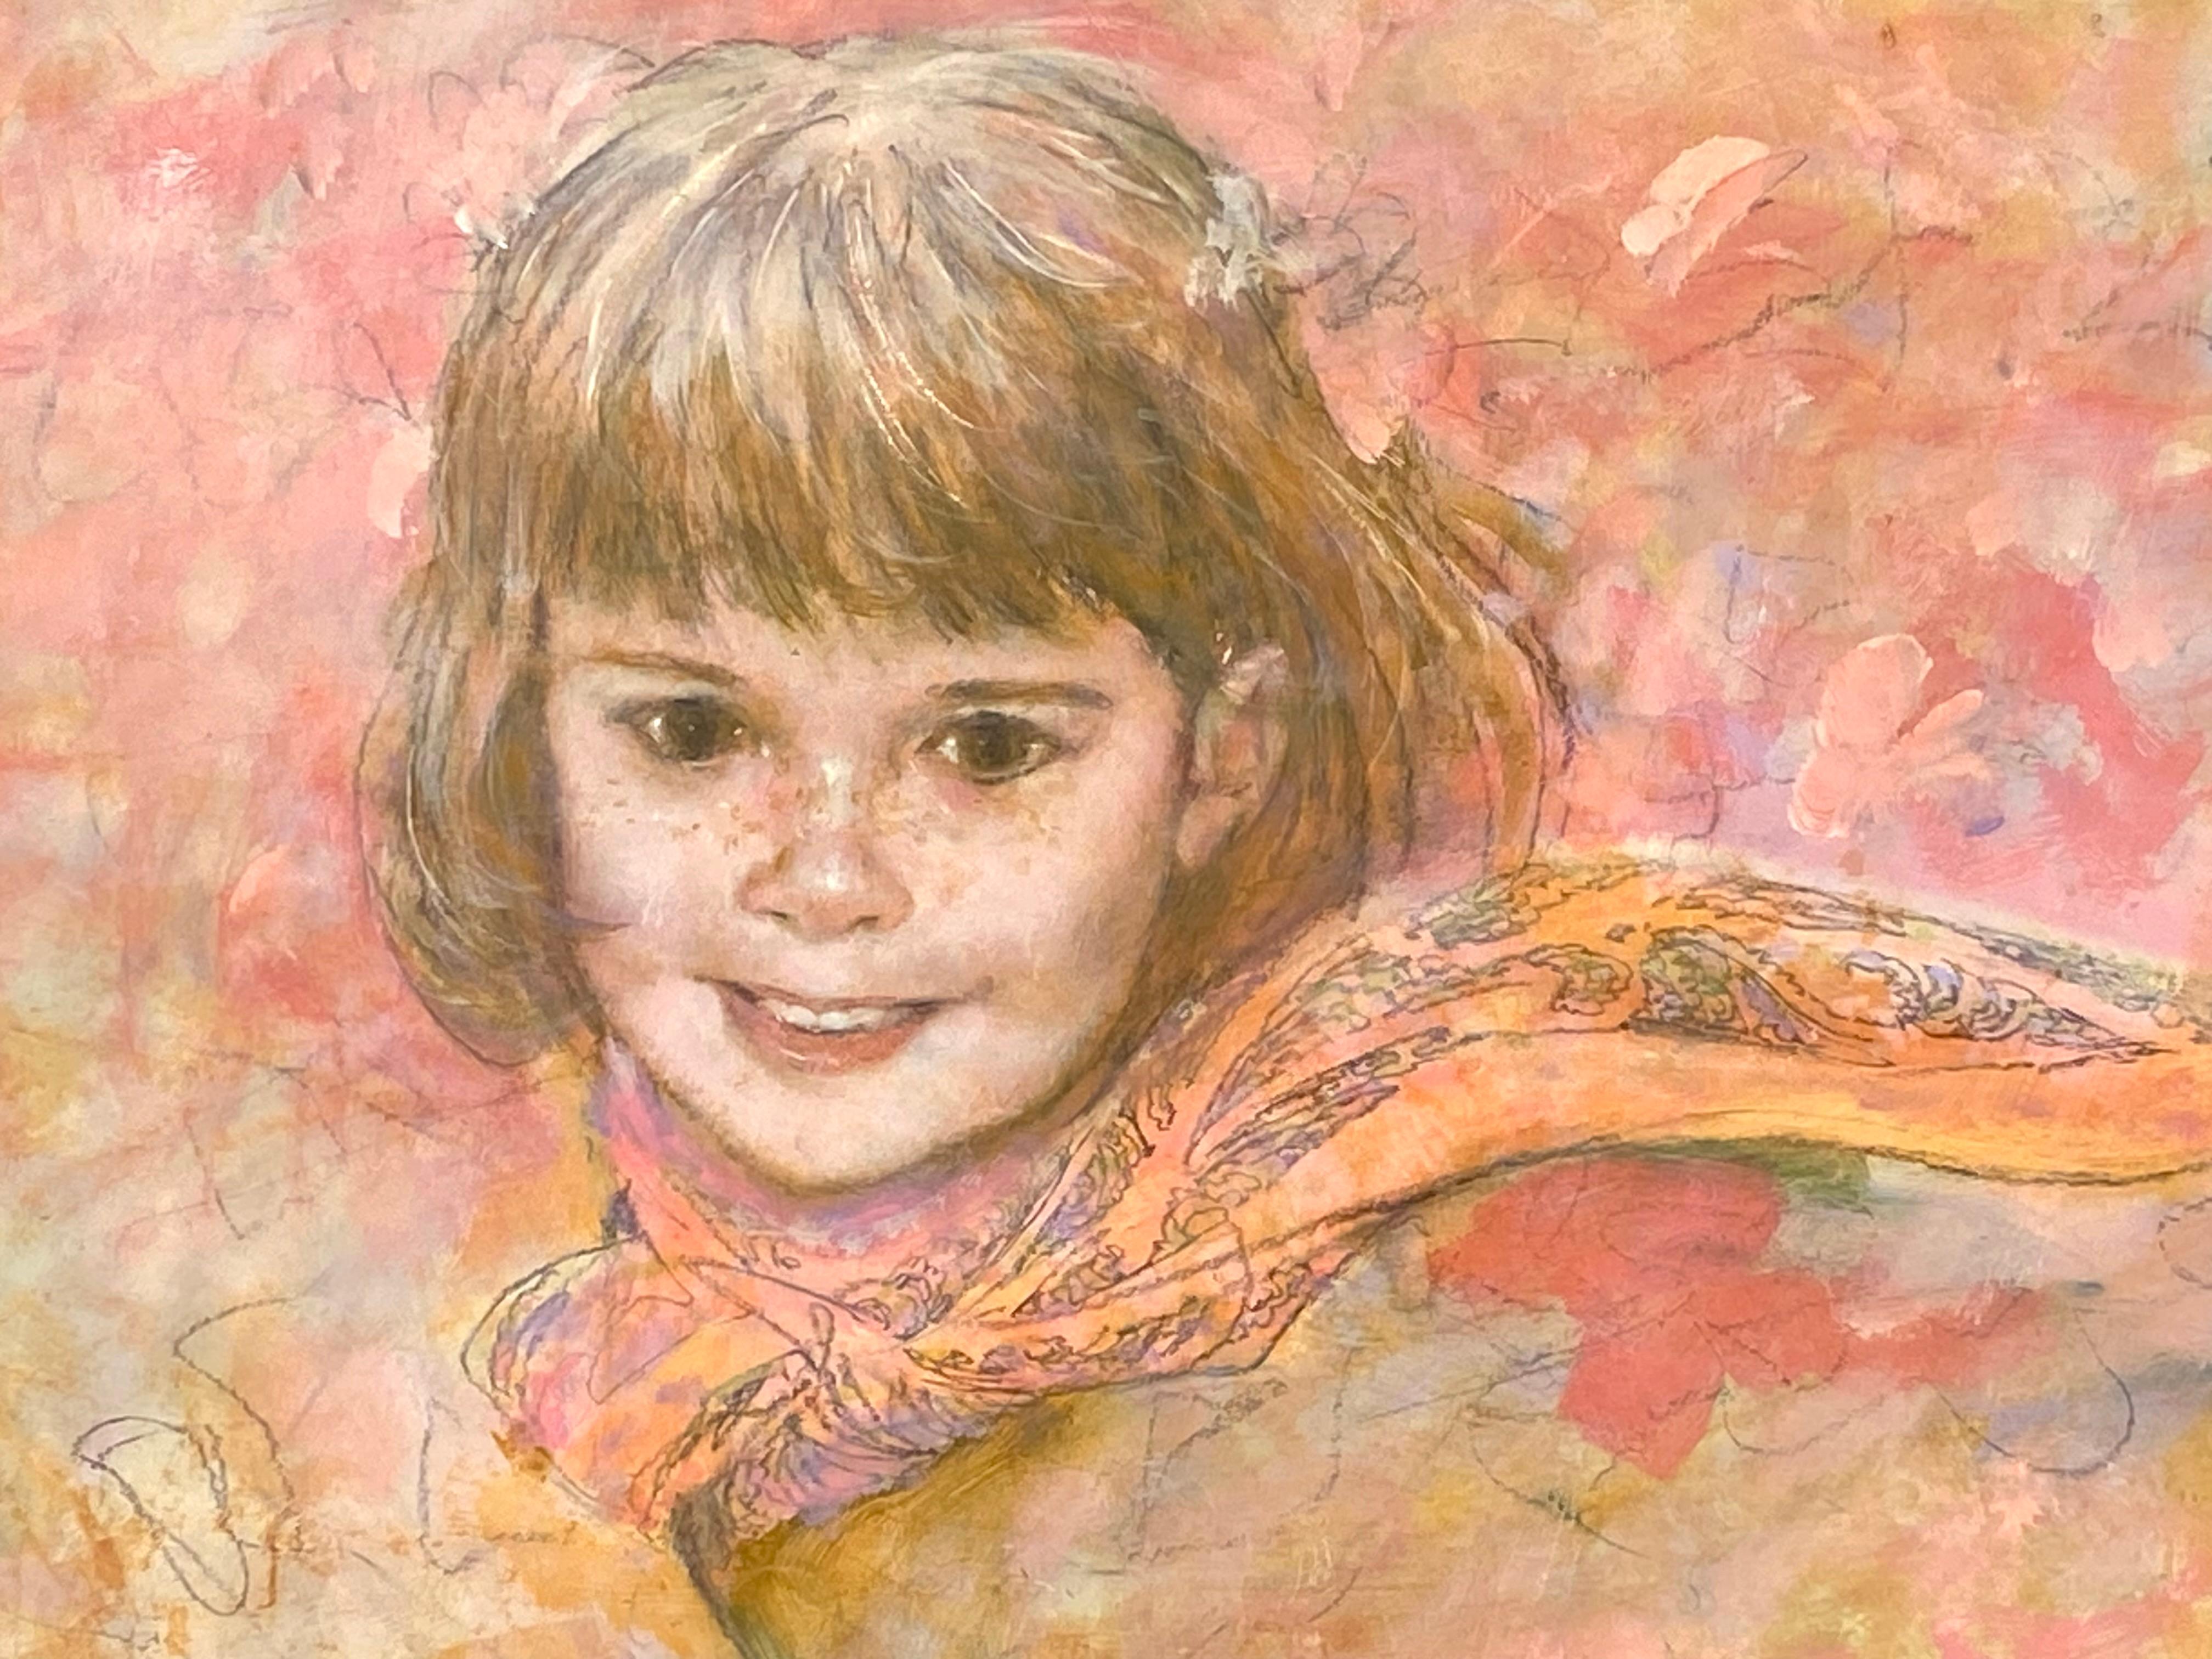 Original mixed media composed of graphite, watercolor, gouache and acrylic paint on hardboard by the well known American artist, Thornton Utz.  Signed lower left and dated 1992.  Condition is excellent. The young smiling girl with a flowing scarf